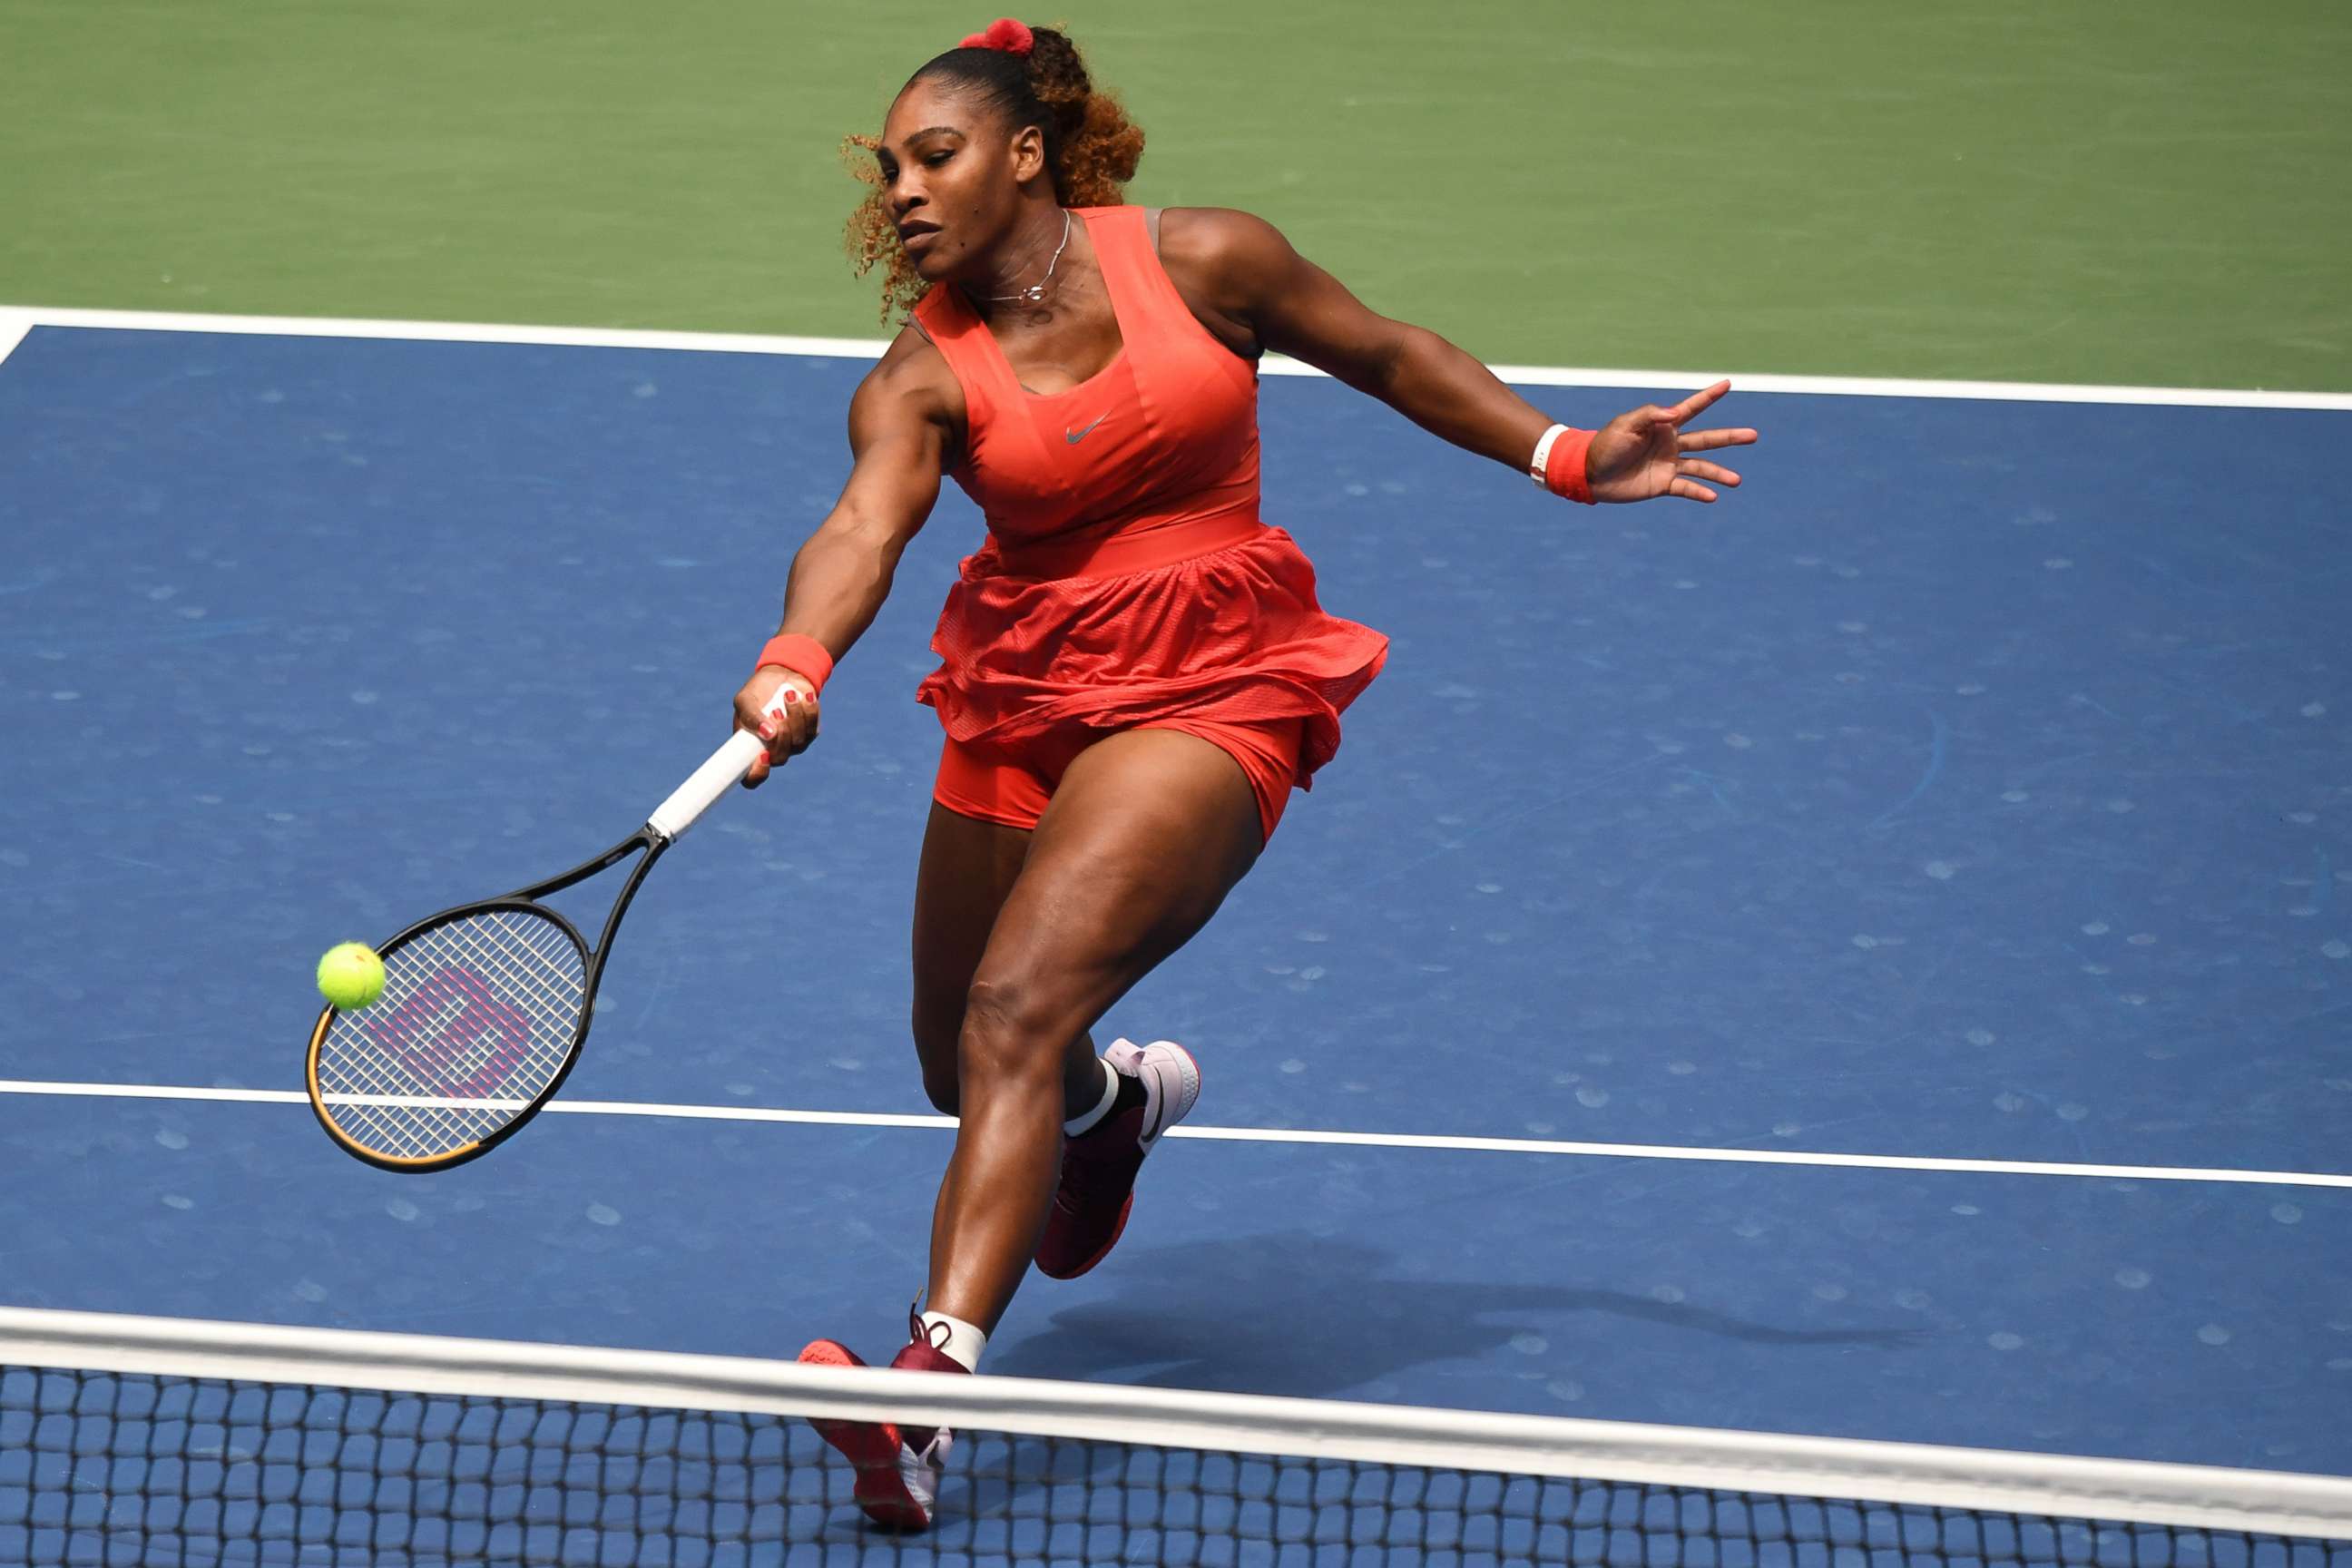 PHOTO: Serena Williams hits a forehand against Tsvetana Pironkova of Bulgaria in a women's singles quarter-finals match on day nine of the 2020 U.S. Open tennis tournament at USTA Billie Jean King National Tennis Center in New York, Sept. 9, 2020.